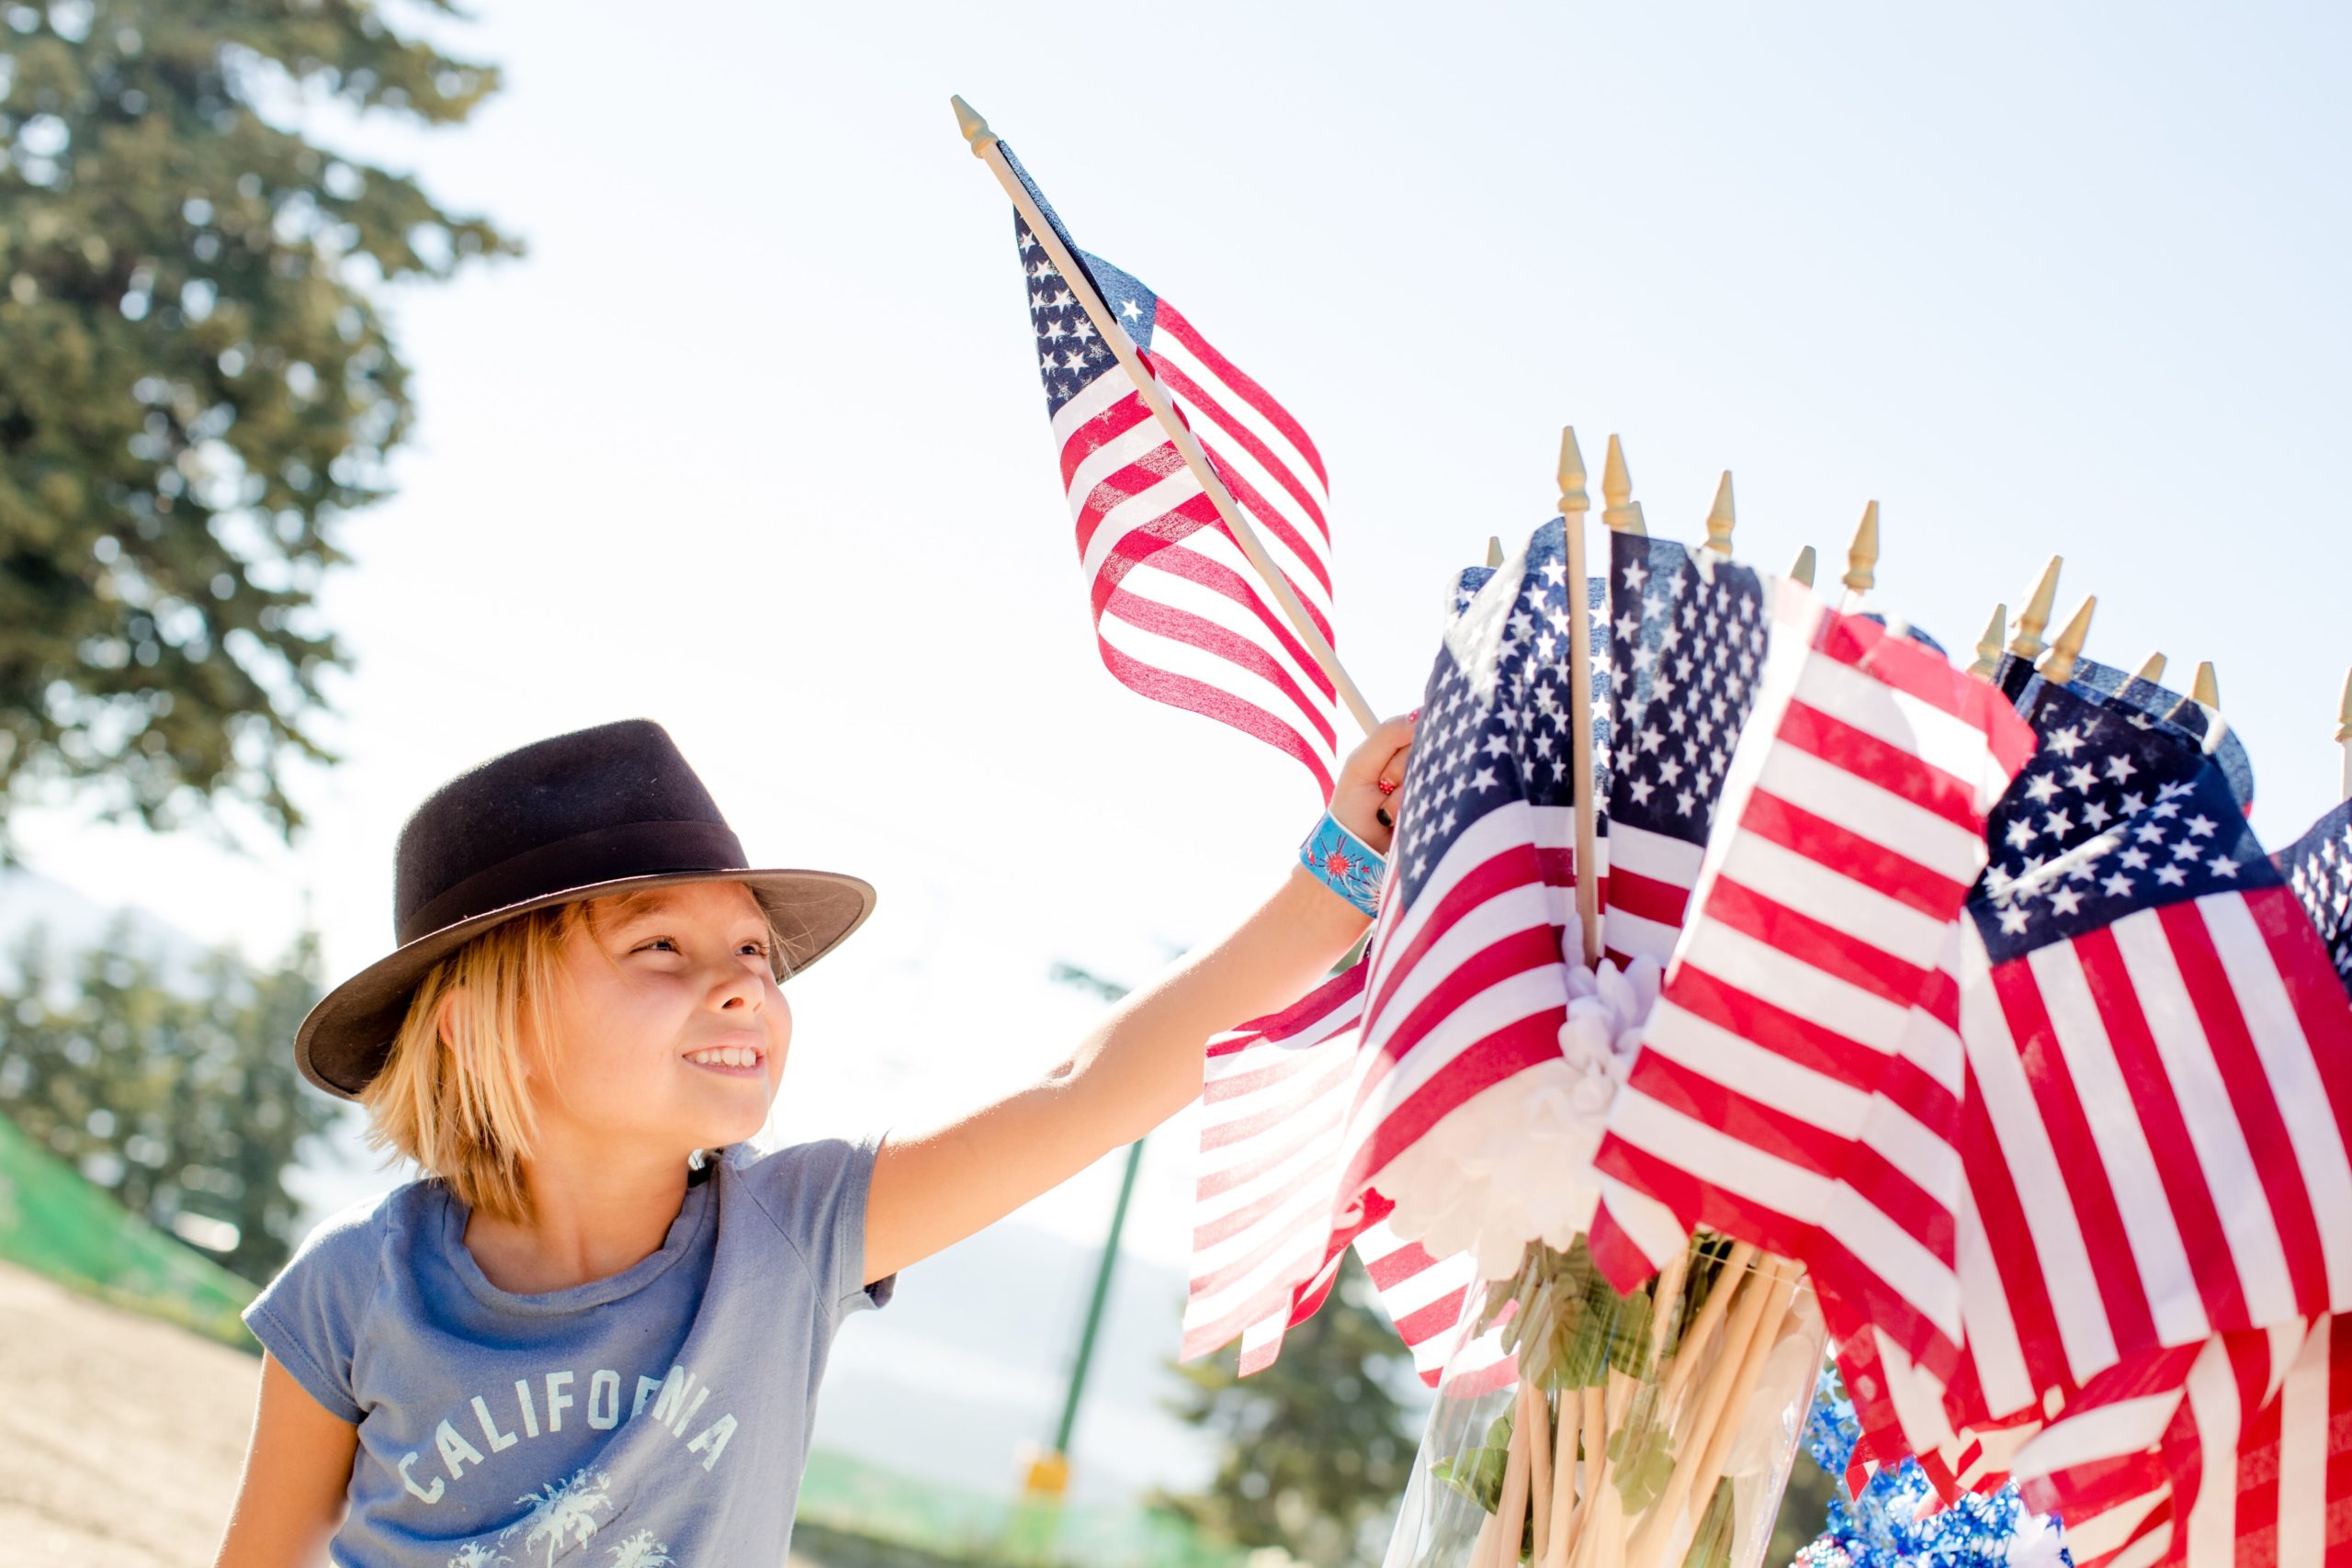 Young girl in a had waves an American flag at a independence day celebration.